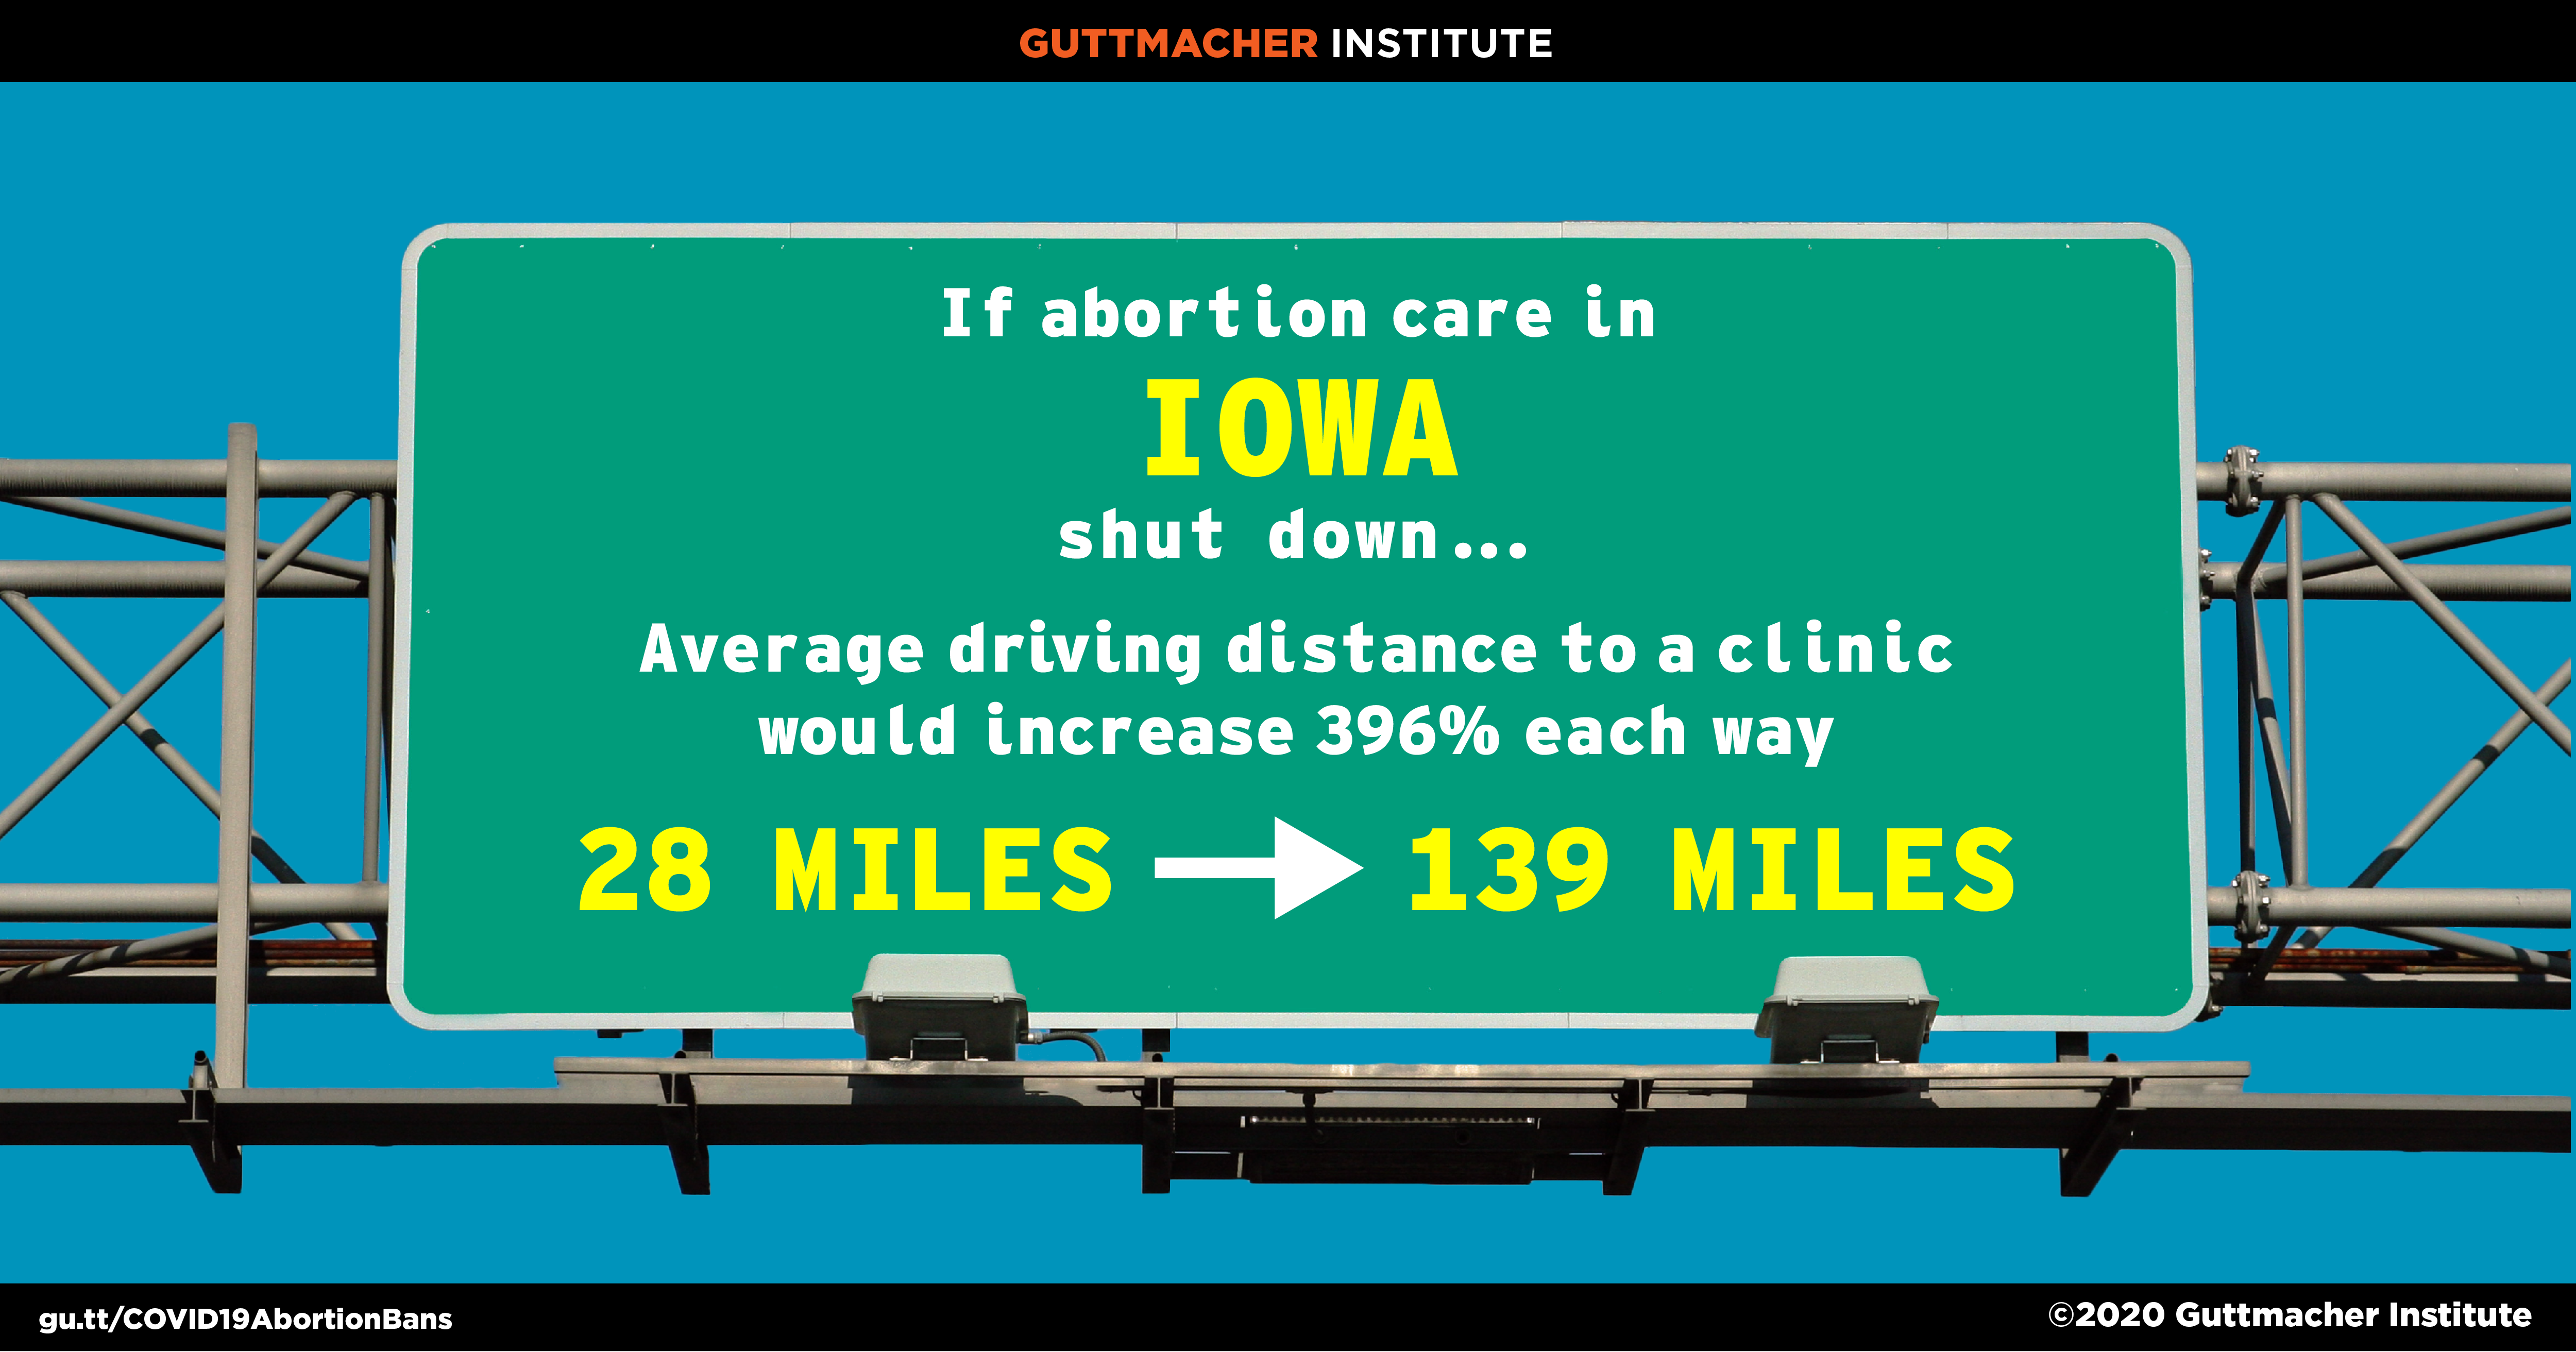 If abortion care in Iowa shut down, the average driving distance to a clinic would increase 396% each way from 28 miles to 139 miles